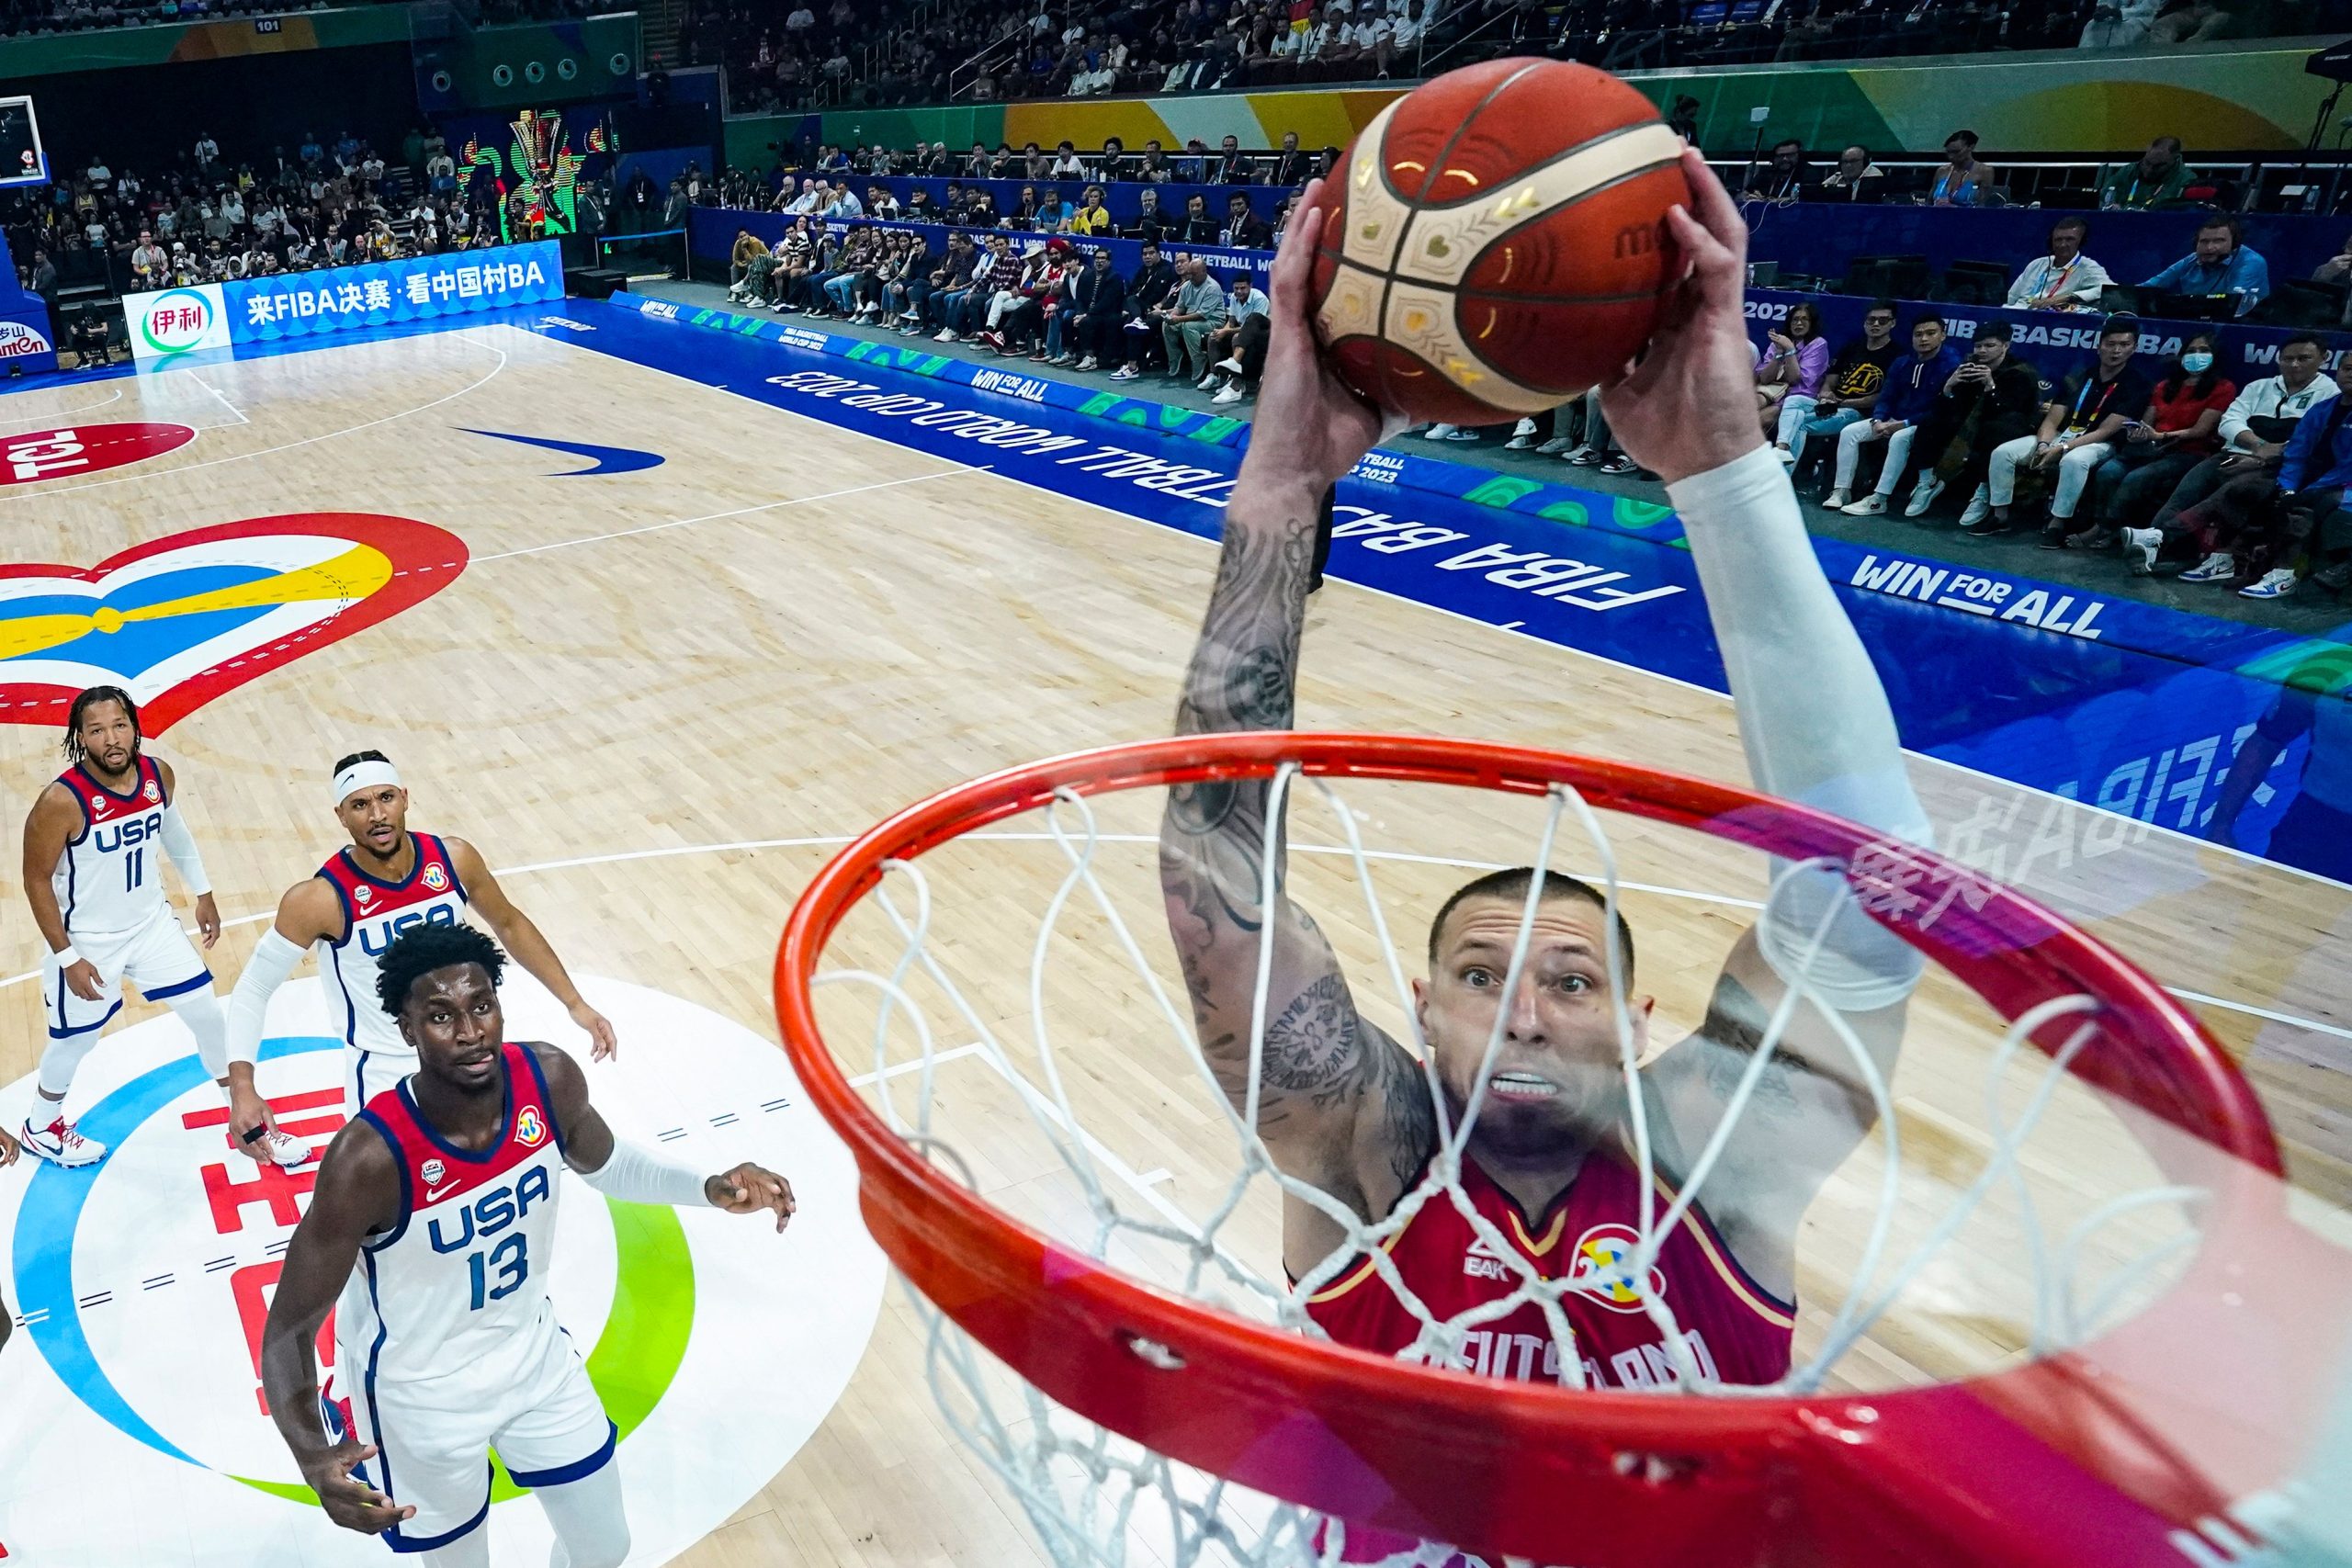 Basquete (Photo by -/POOL/AFP via Getty Images)